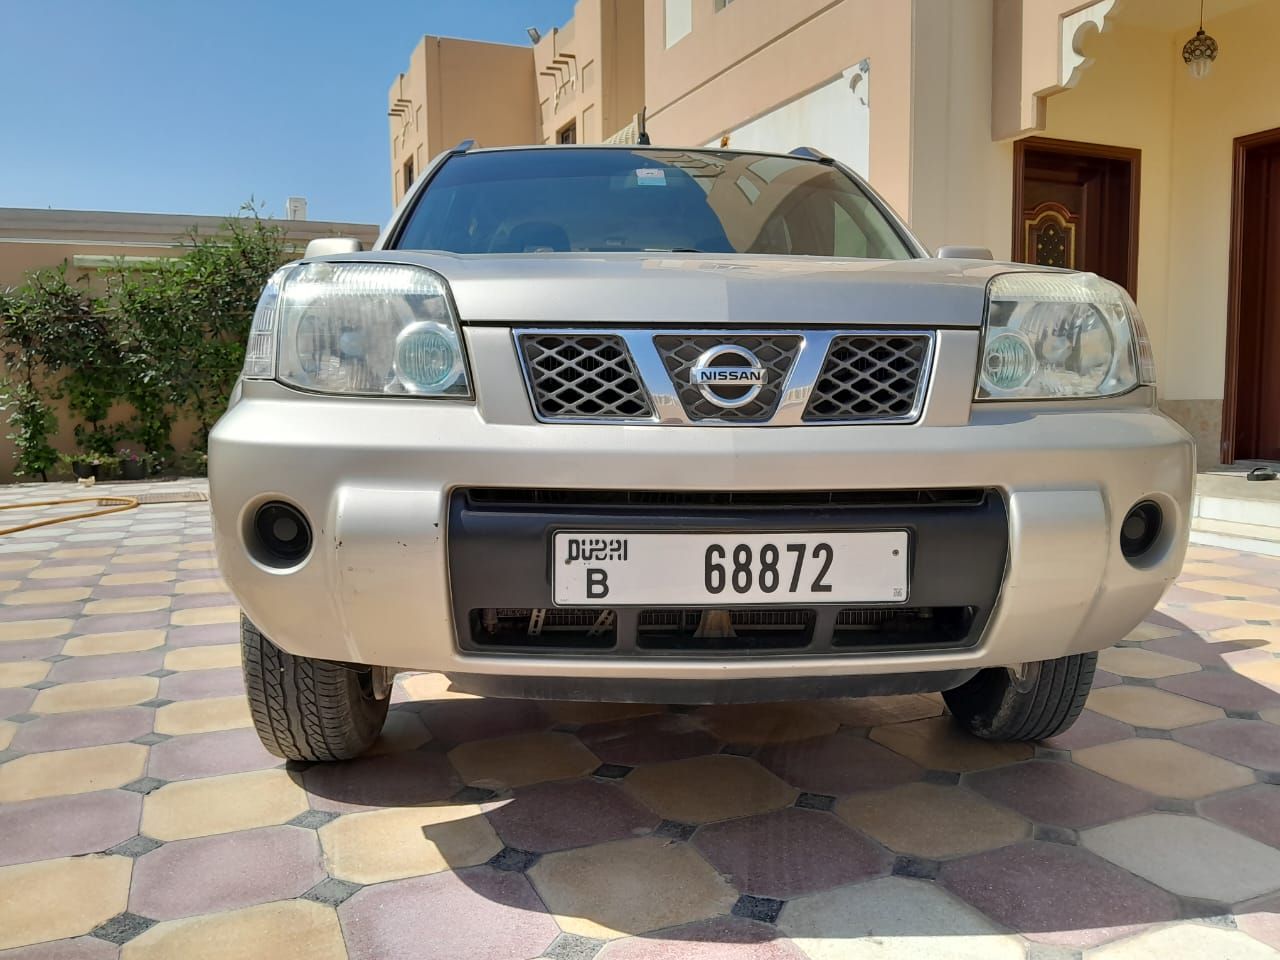 NISSAN X-TRAIL 2012 FOR SALE!!